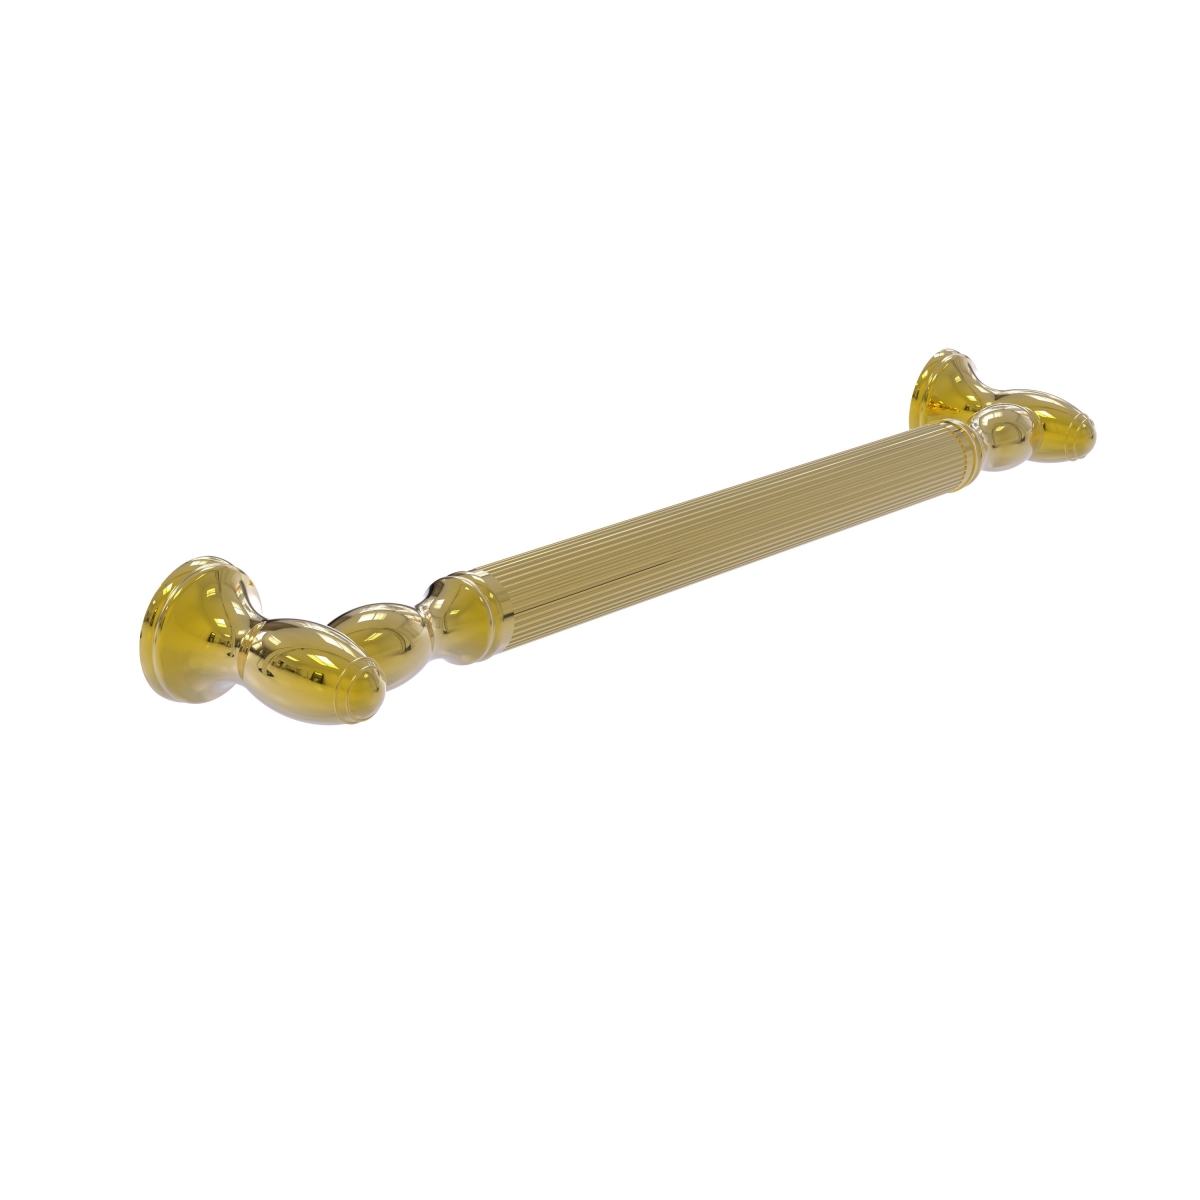 Picture of Allied Brass TD-GRR-32-PB 32 in. Reeded Grab Bar, Polished Brass - 3.5 x 34 x 32 in.